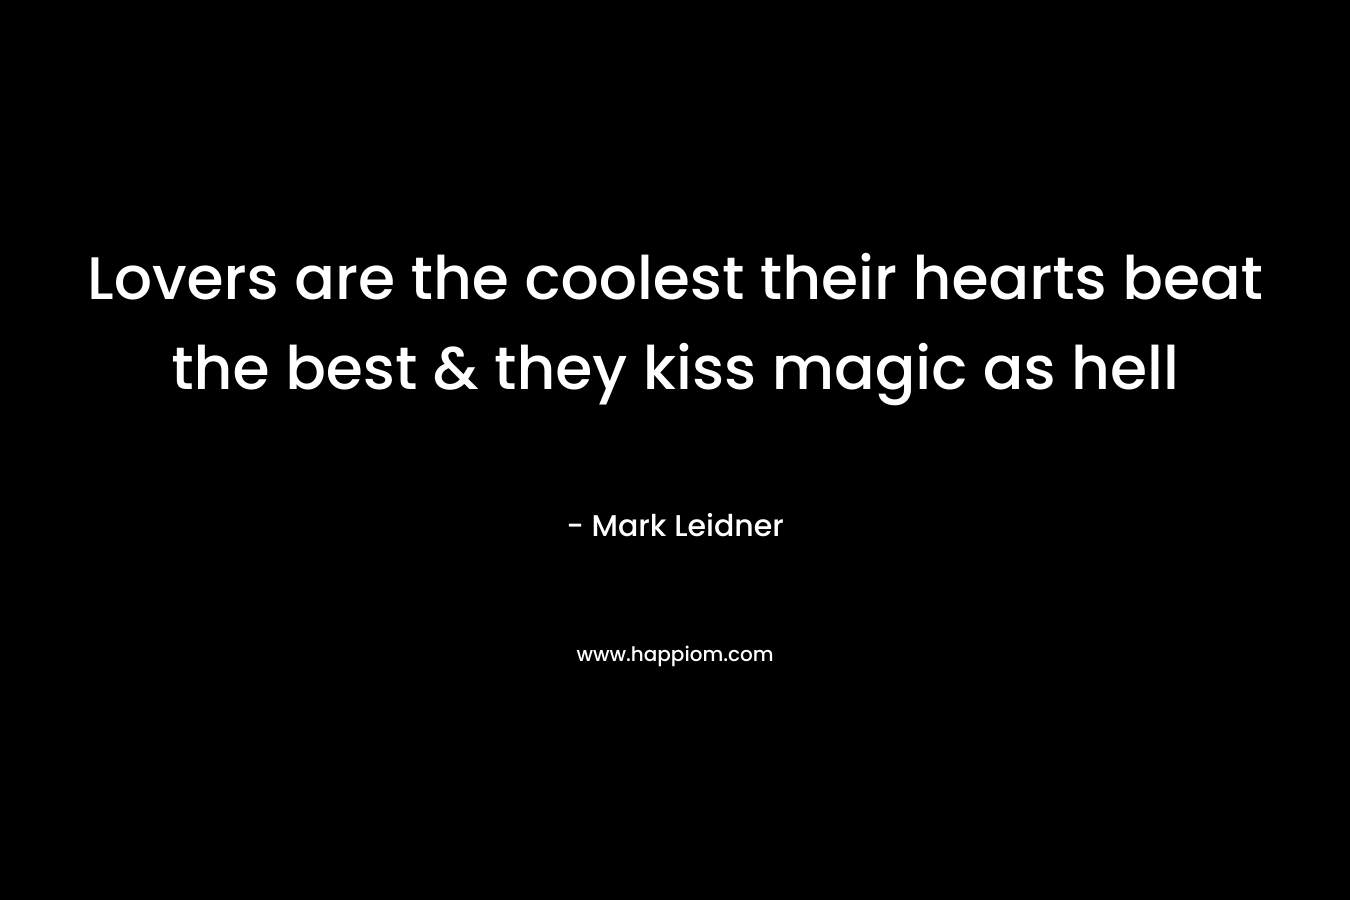 Lovers are the coolest their hearts beat the best & they kiss magic as hell – Mark Leidner